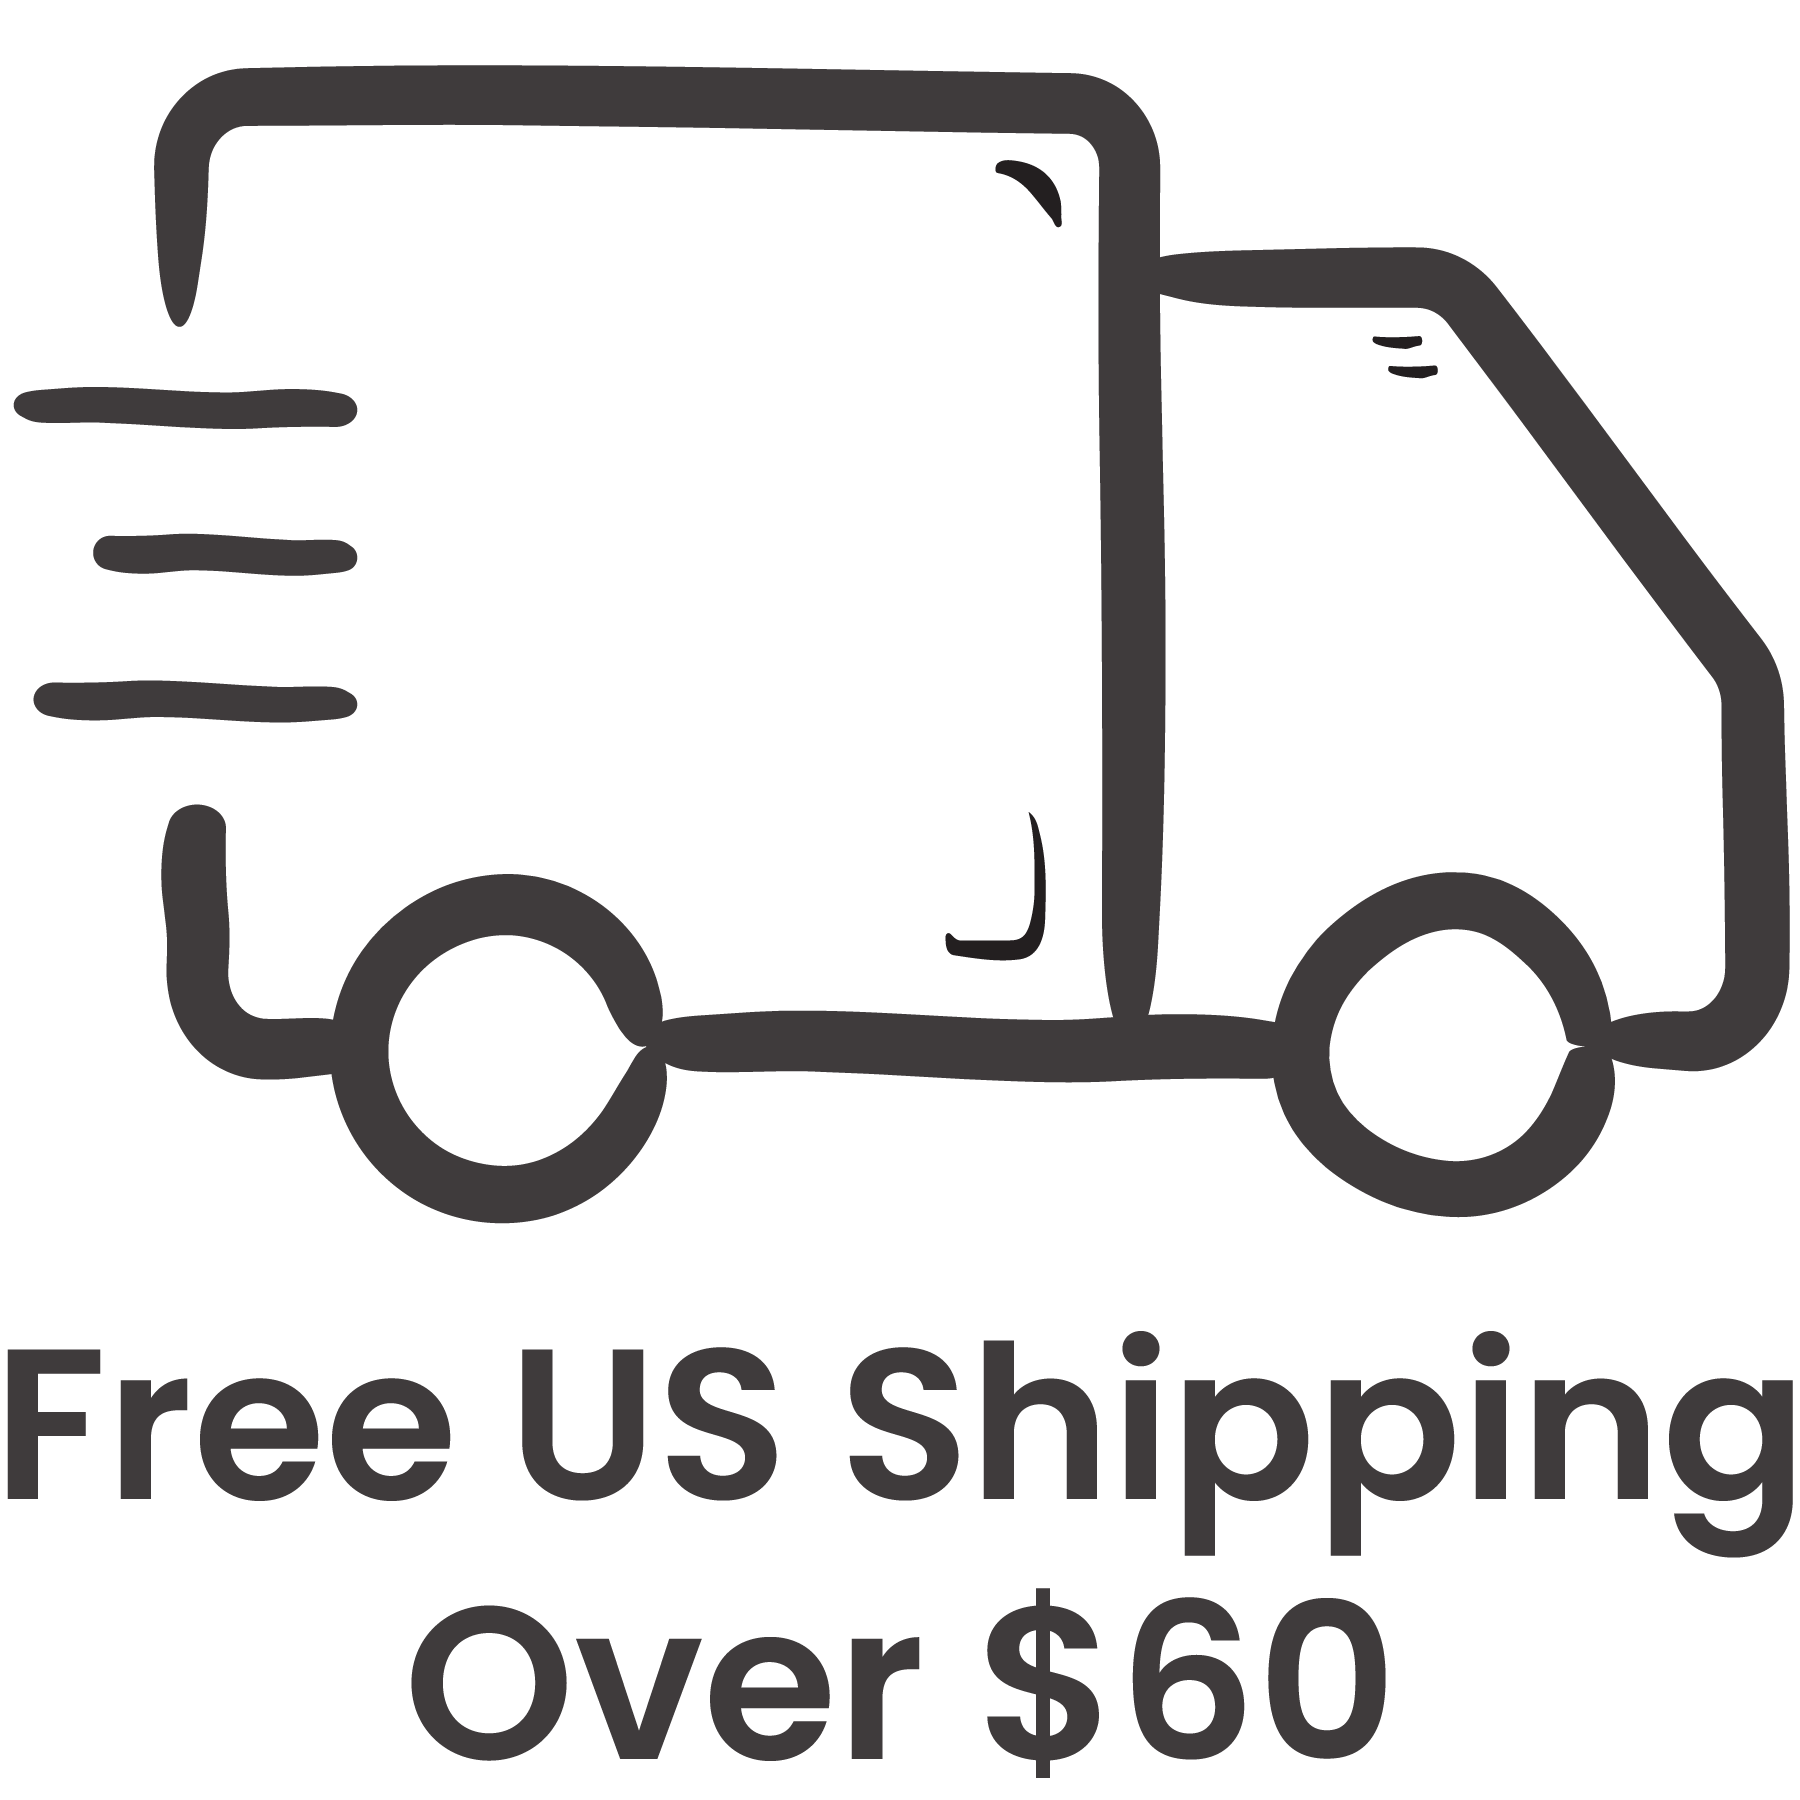 Free US Shipping Over $60